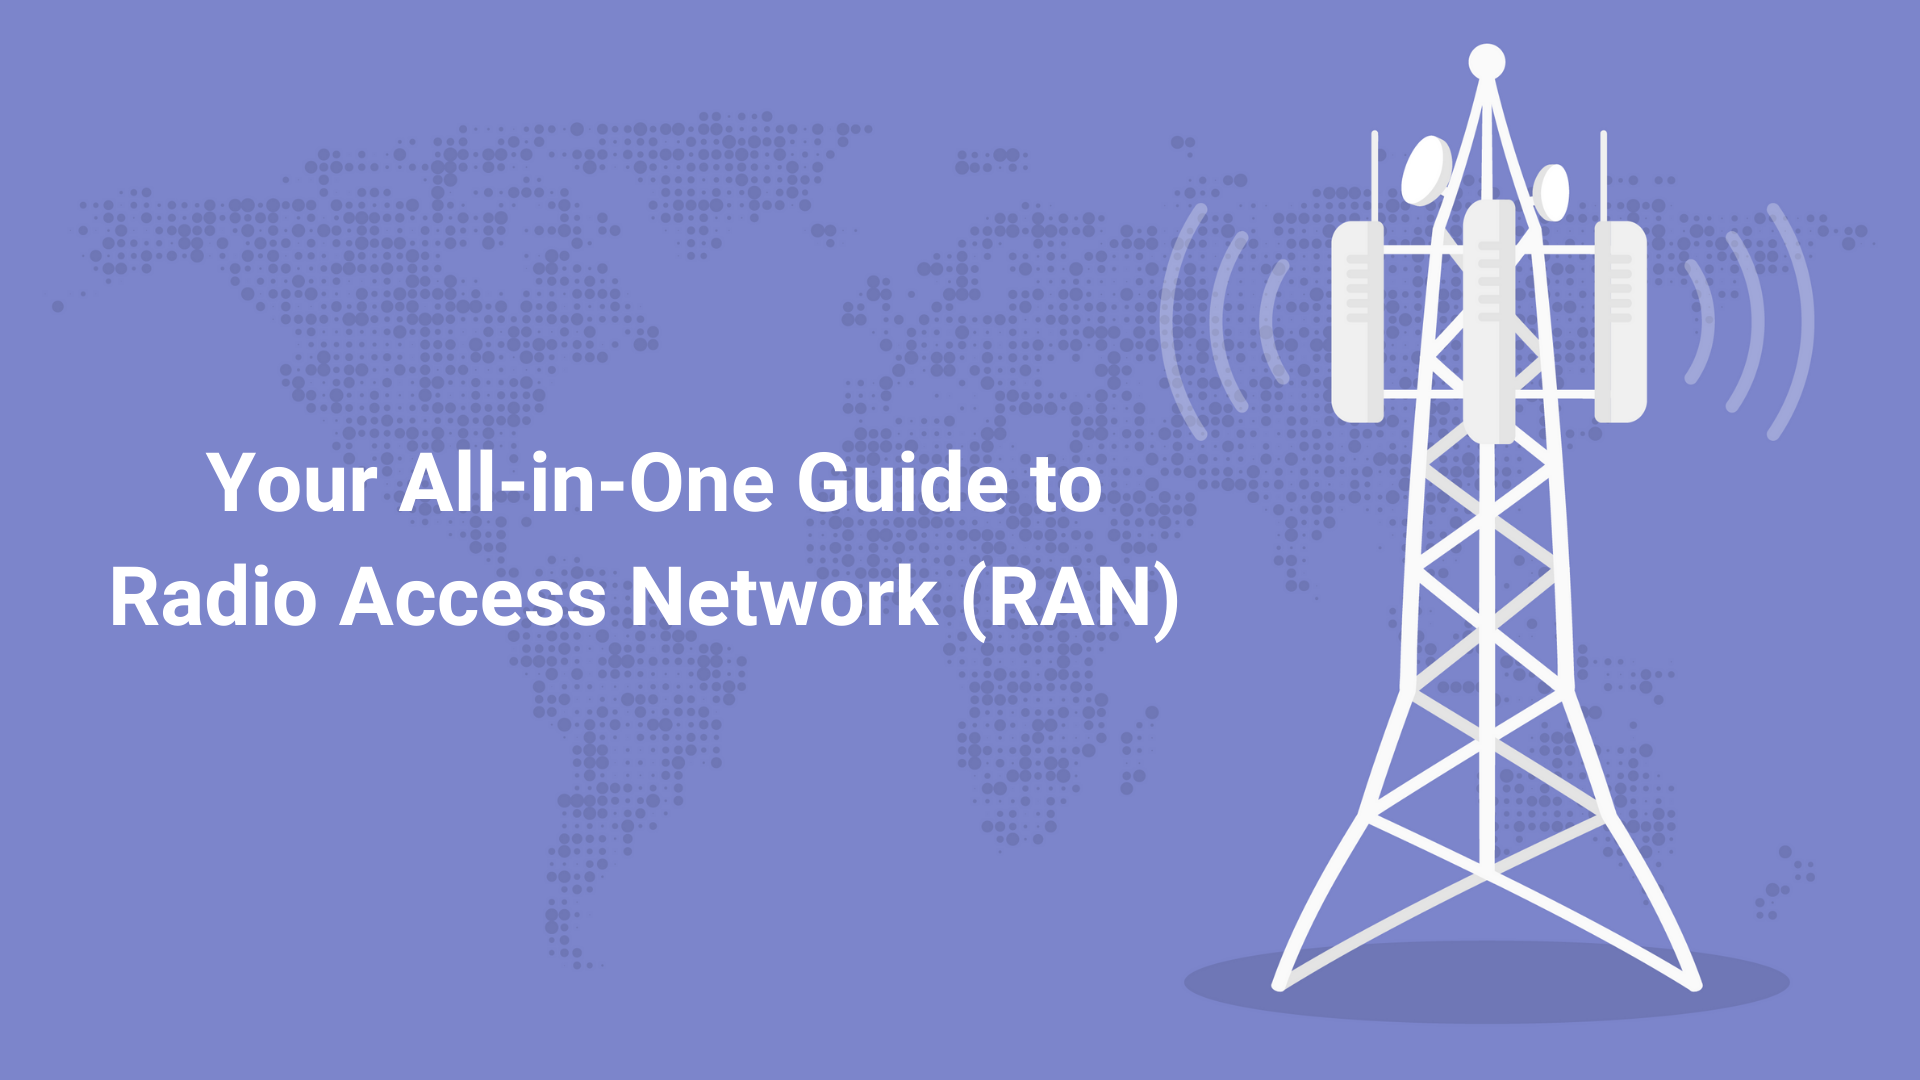 Your All-in-One Guide to Radio Access Network (RAN)